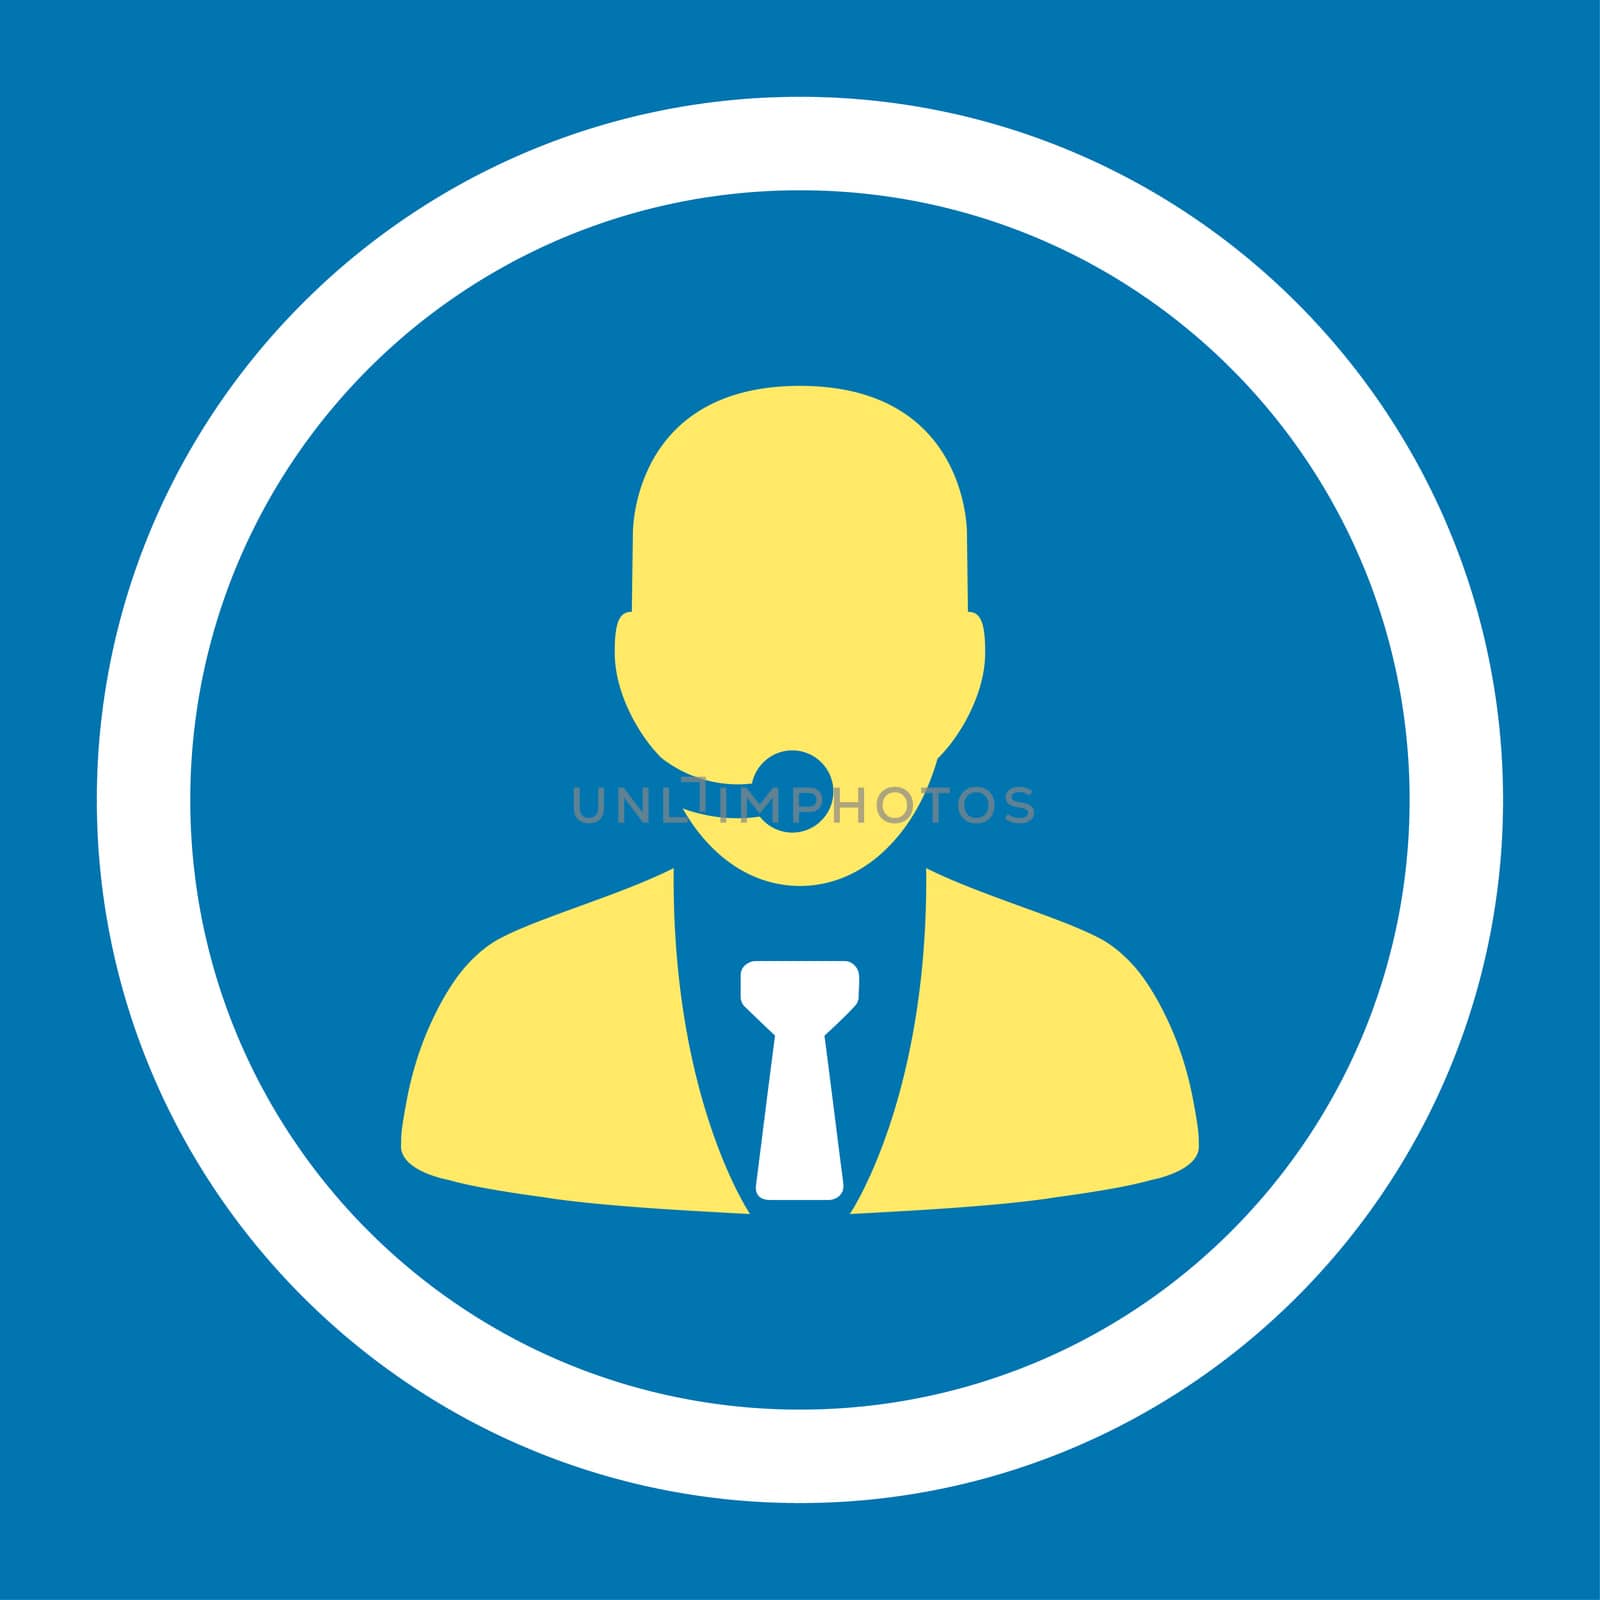 Call center operator glyph icon. This rounded flat symbol is drawn with yellow and white colors on a blue background.